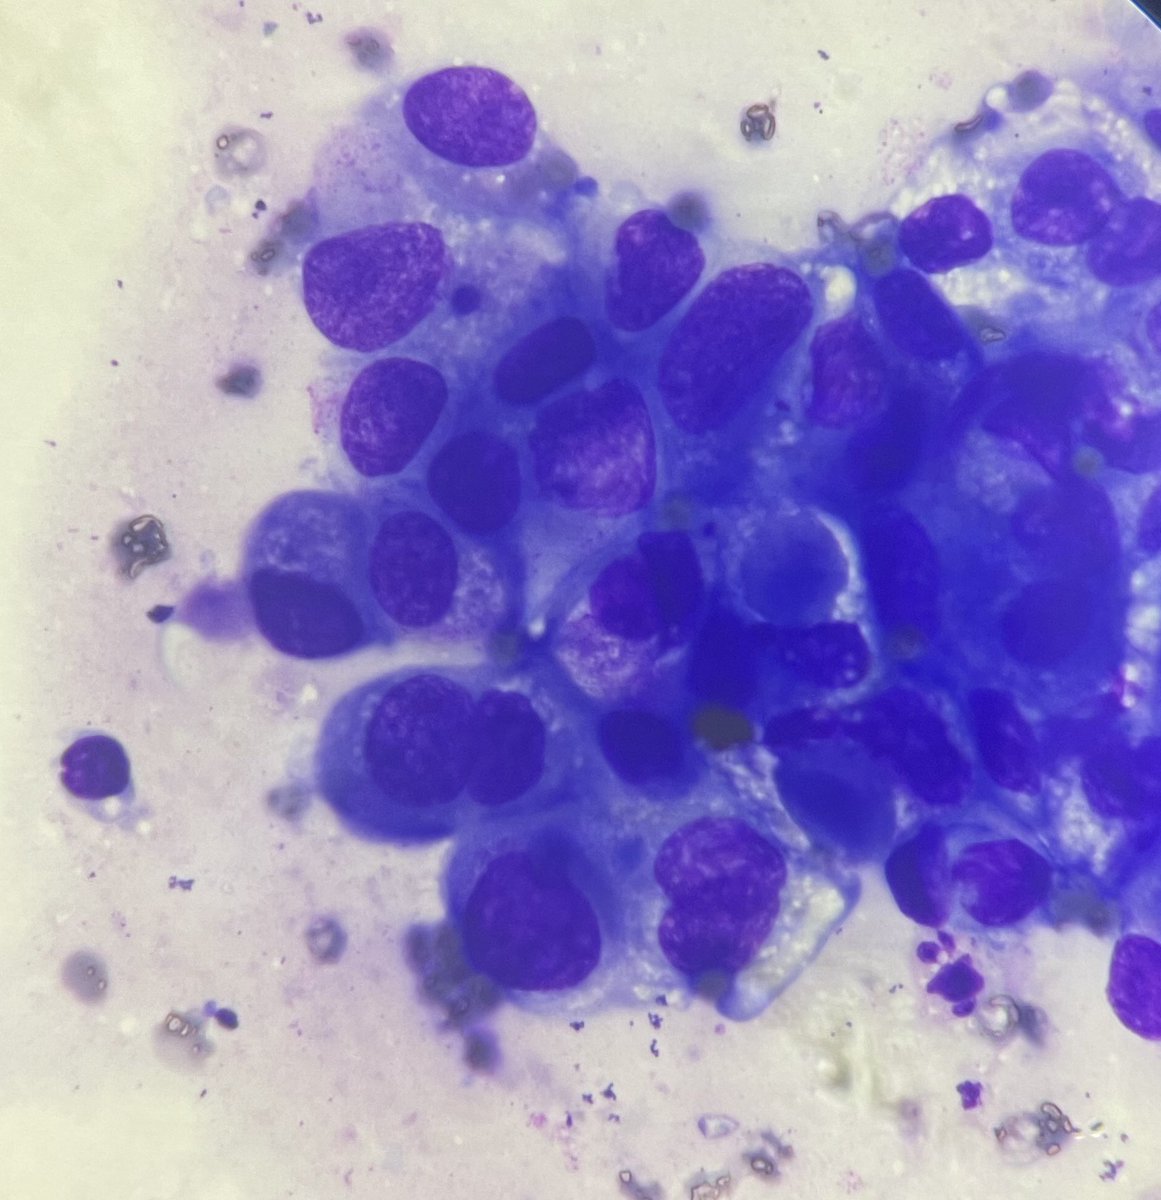 50 year female, c/o bloody nipple discharge .

#imprintsmearcytology #cytology  #PathTwitter